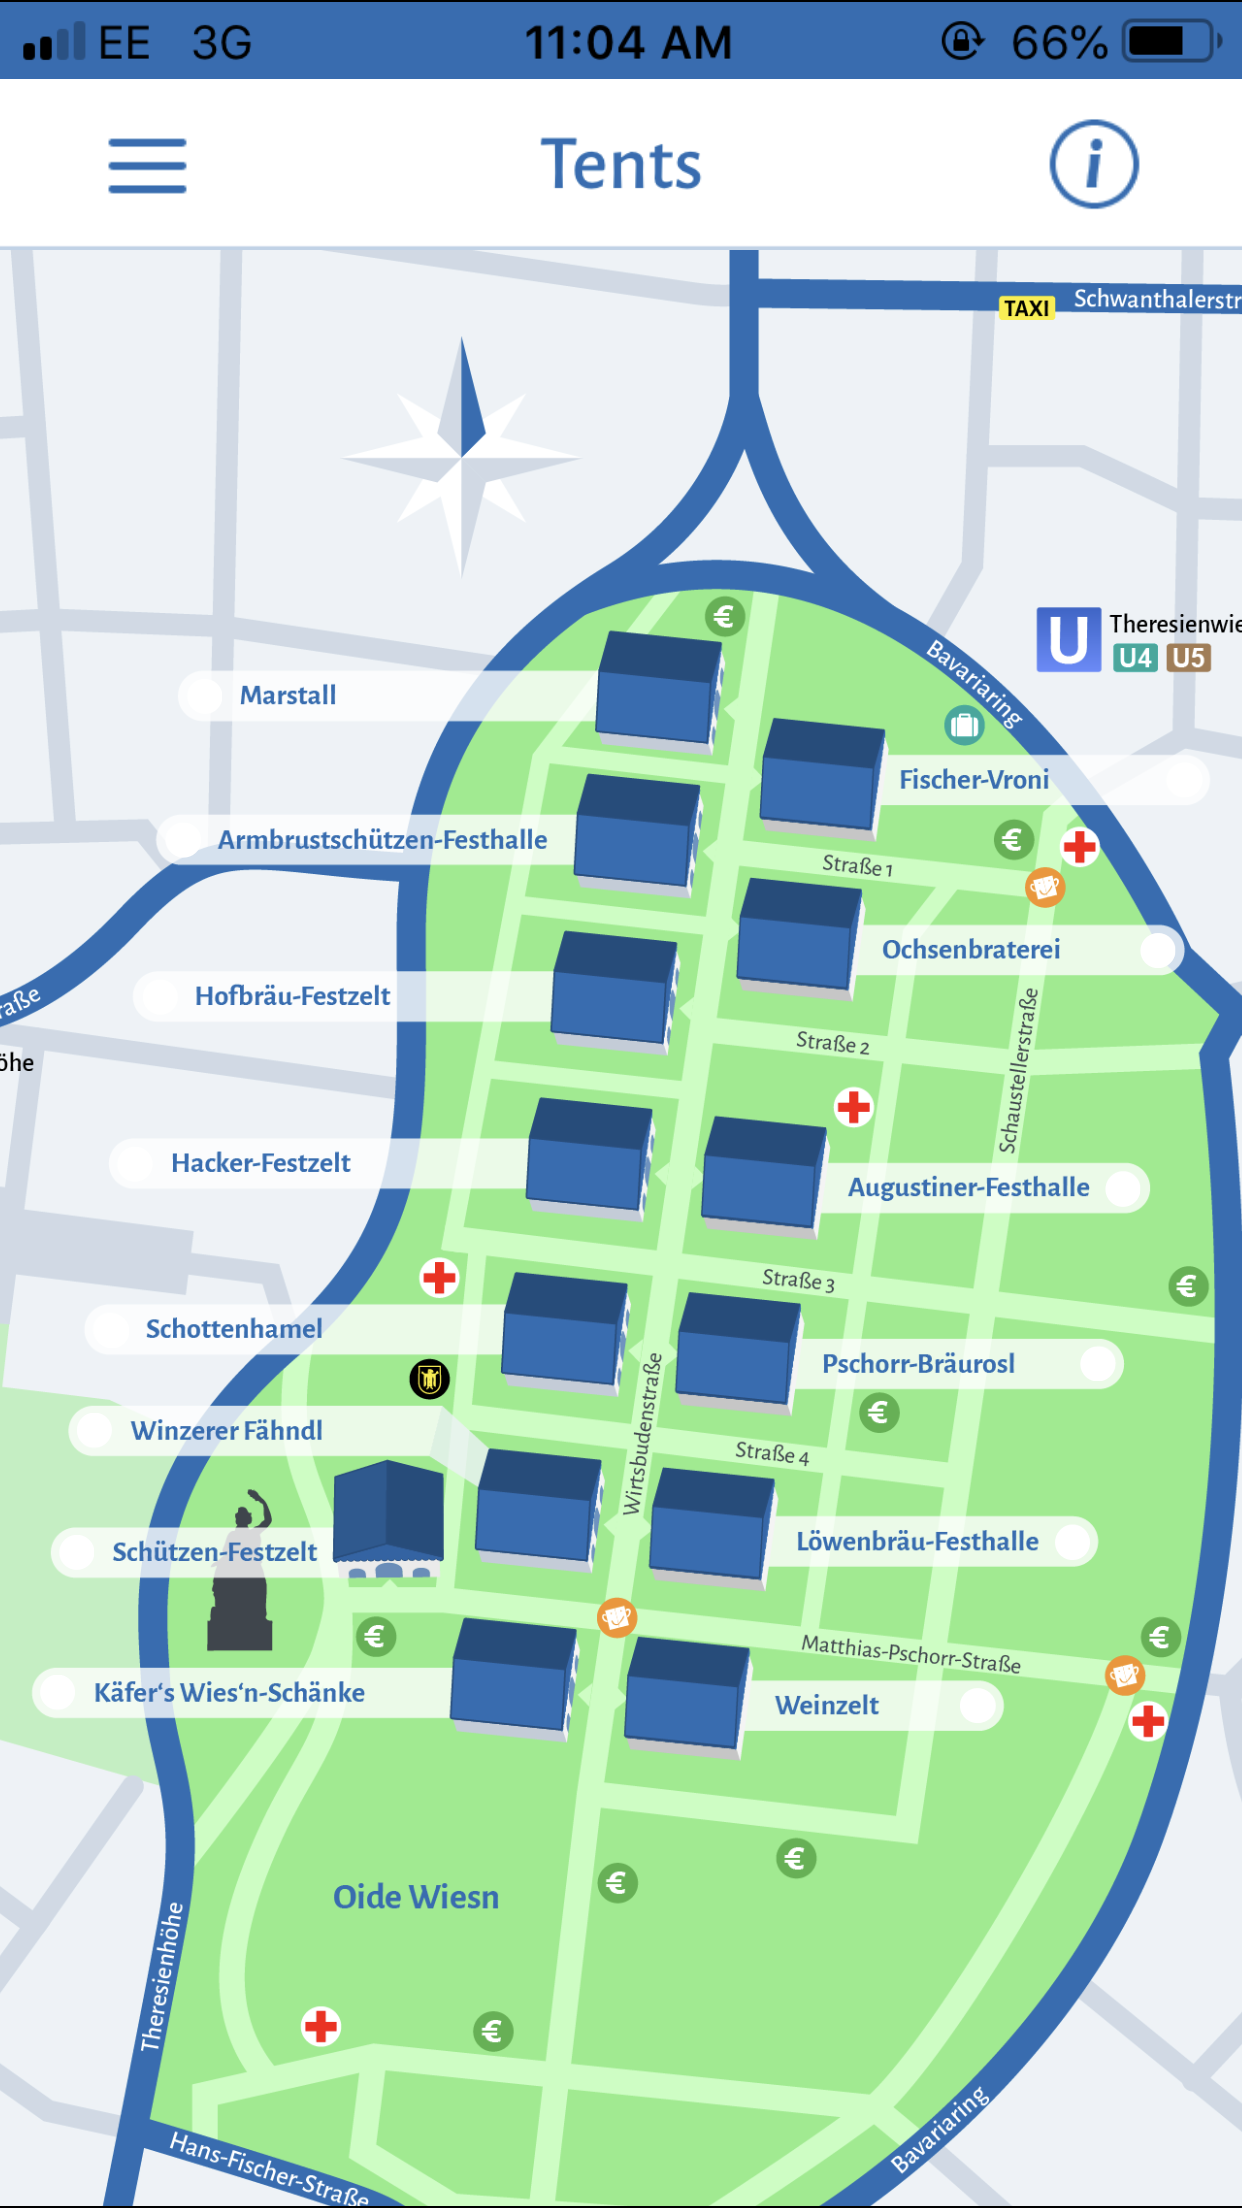 Map of the tents from the app